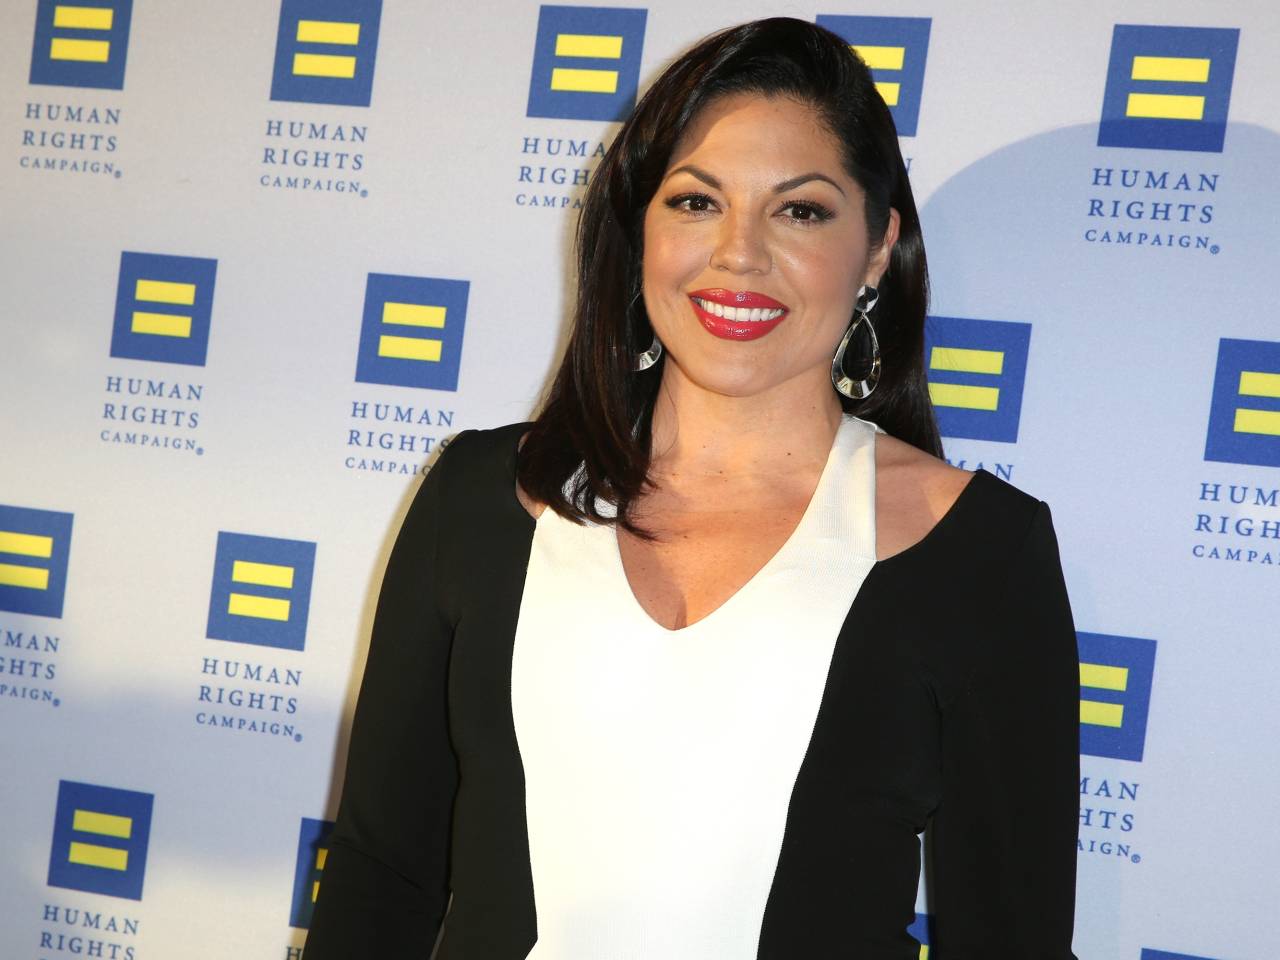 FILE - In this March 14, 2015 file photo, Sara Ramirez arrives at the 2015 Human Rights Campaign Gala Dinner at the JW Marriott LA Live in Los Angeles. Surgeon Callie Torres is turning in her scalpel at Grey Sloan Memorial Hospital. Ramirez, who plays Dr. Torres on "Grey's Anatomy," tweeted Thursday, May 19, 2016, that she's taking "welcome time off" after 10 years with the ABC medical drama. (Photo by Rich Fury/Invision/AP, File)